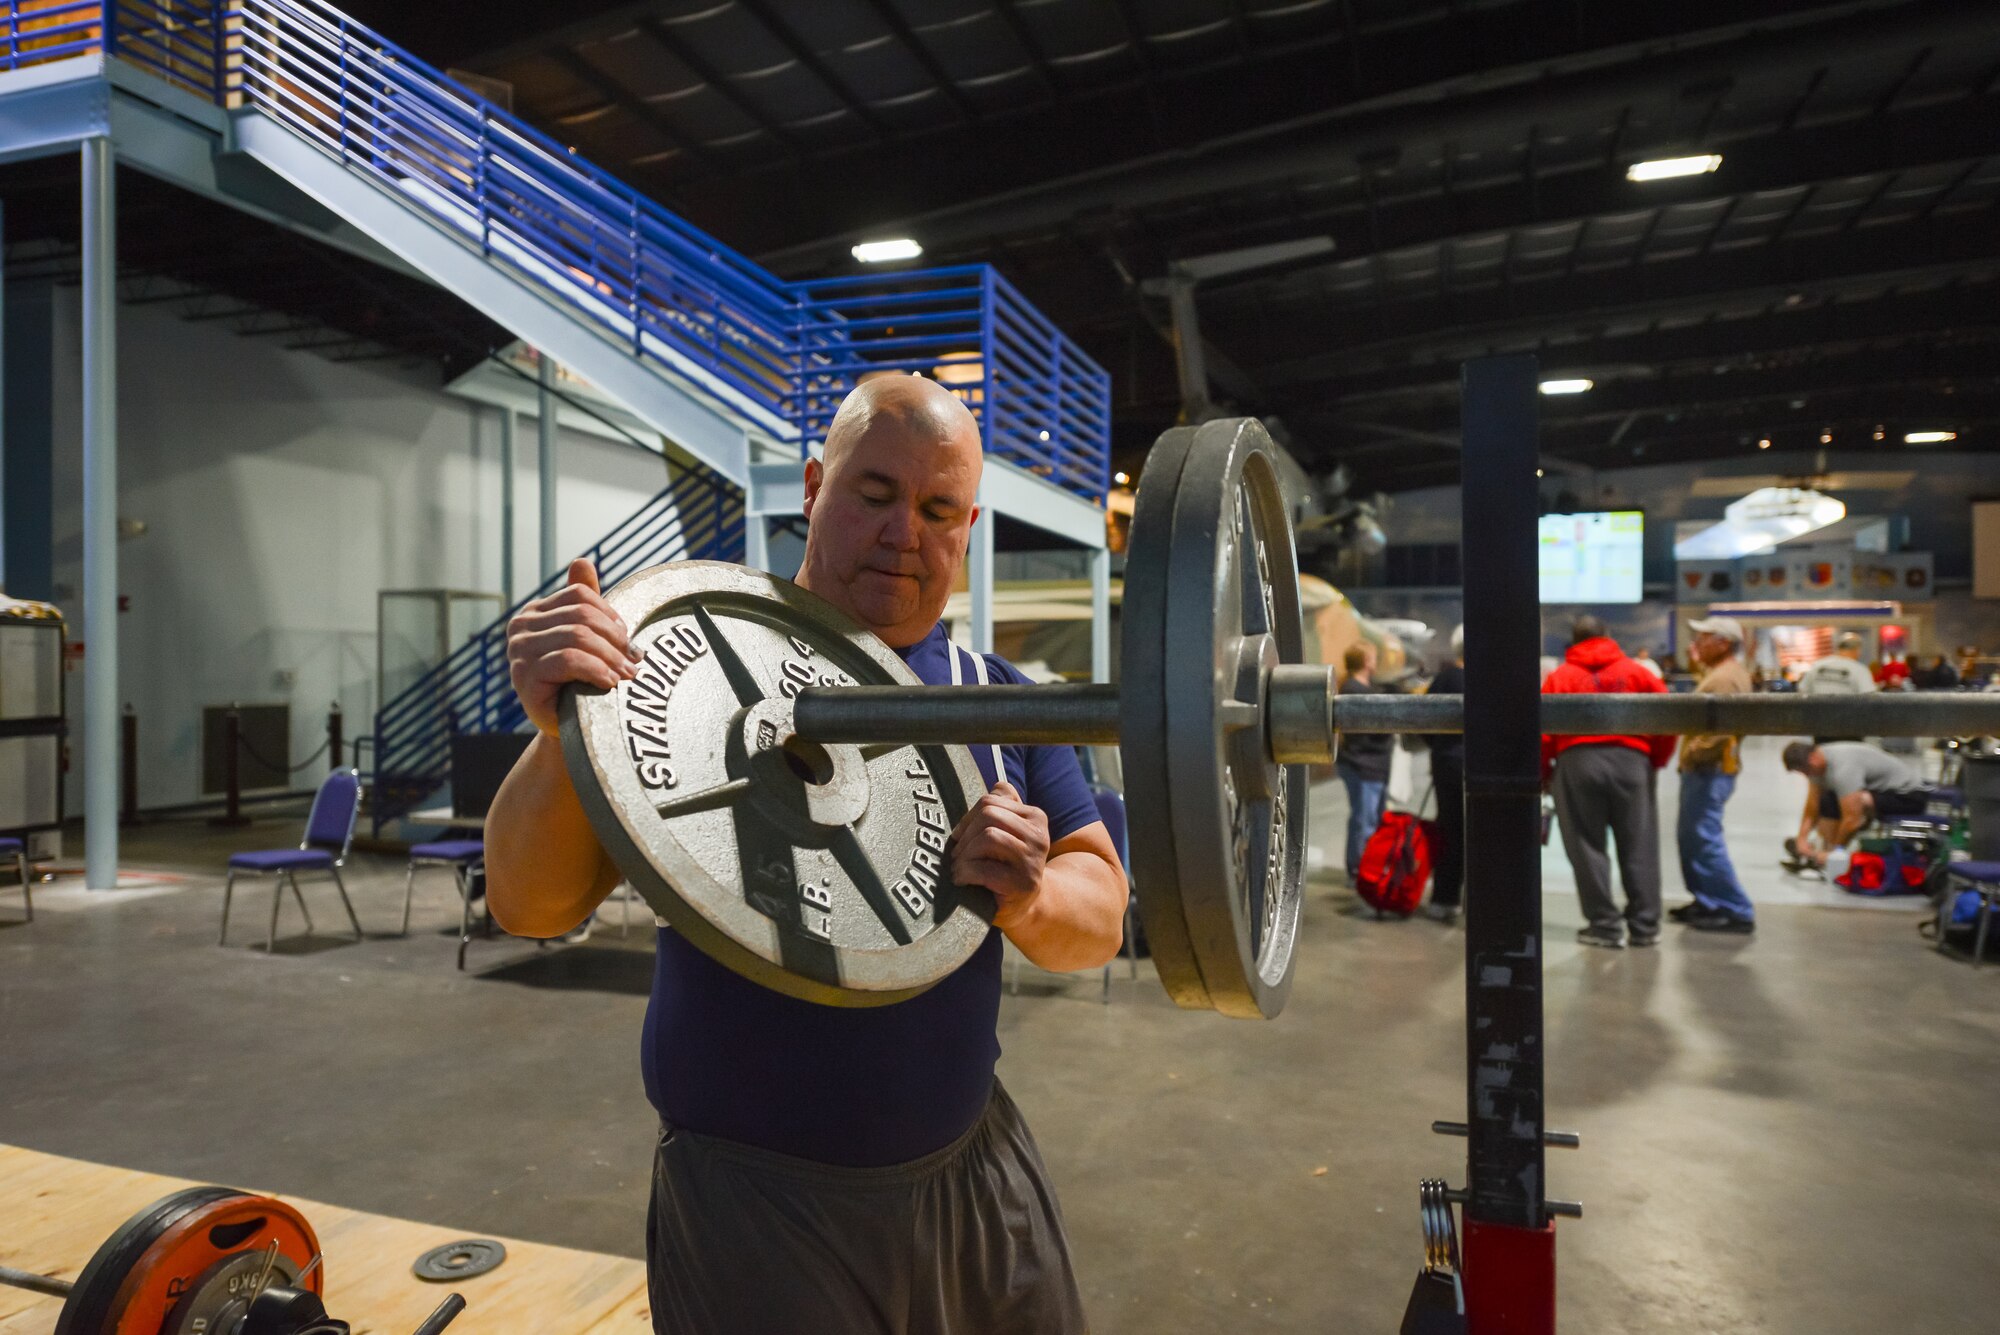 U.S. Air Force Tech. Sgt. Michael Lloyd of the 165th Airlift Wing, Georgia Air National Guard places a 45 lb. weight on a barbell, Jan. 25, 2014, at the Museum of Aviation in Warner Robins, Ga. Lloyd broke four U.S.A. Powerlifting Georgia state records at the 2014 Winter Classic and Single Ply Invitational. He set a record for squat, bench press, three event total (squat, bench press, deadlift), and bench press only for the Masters Division in his weight class at his first powerlifting competition. (U.S. Air National Guard photo by Master Sgt. Charles Delano/Released)